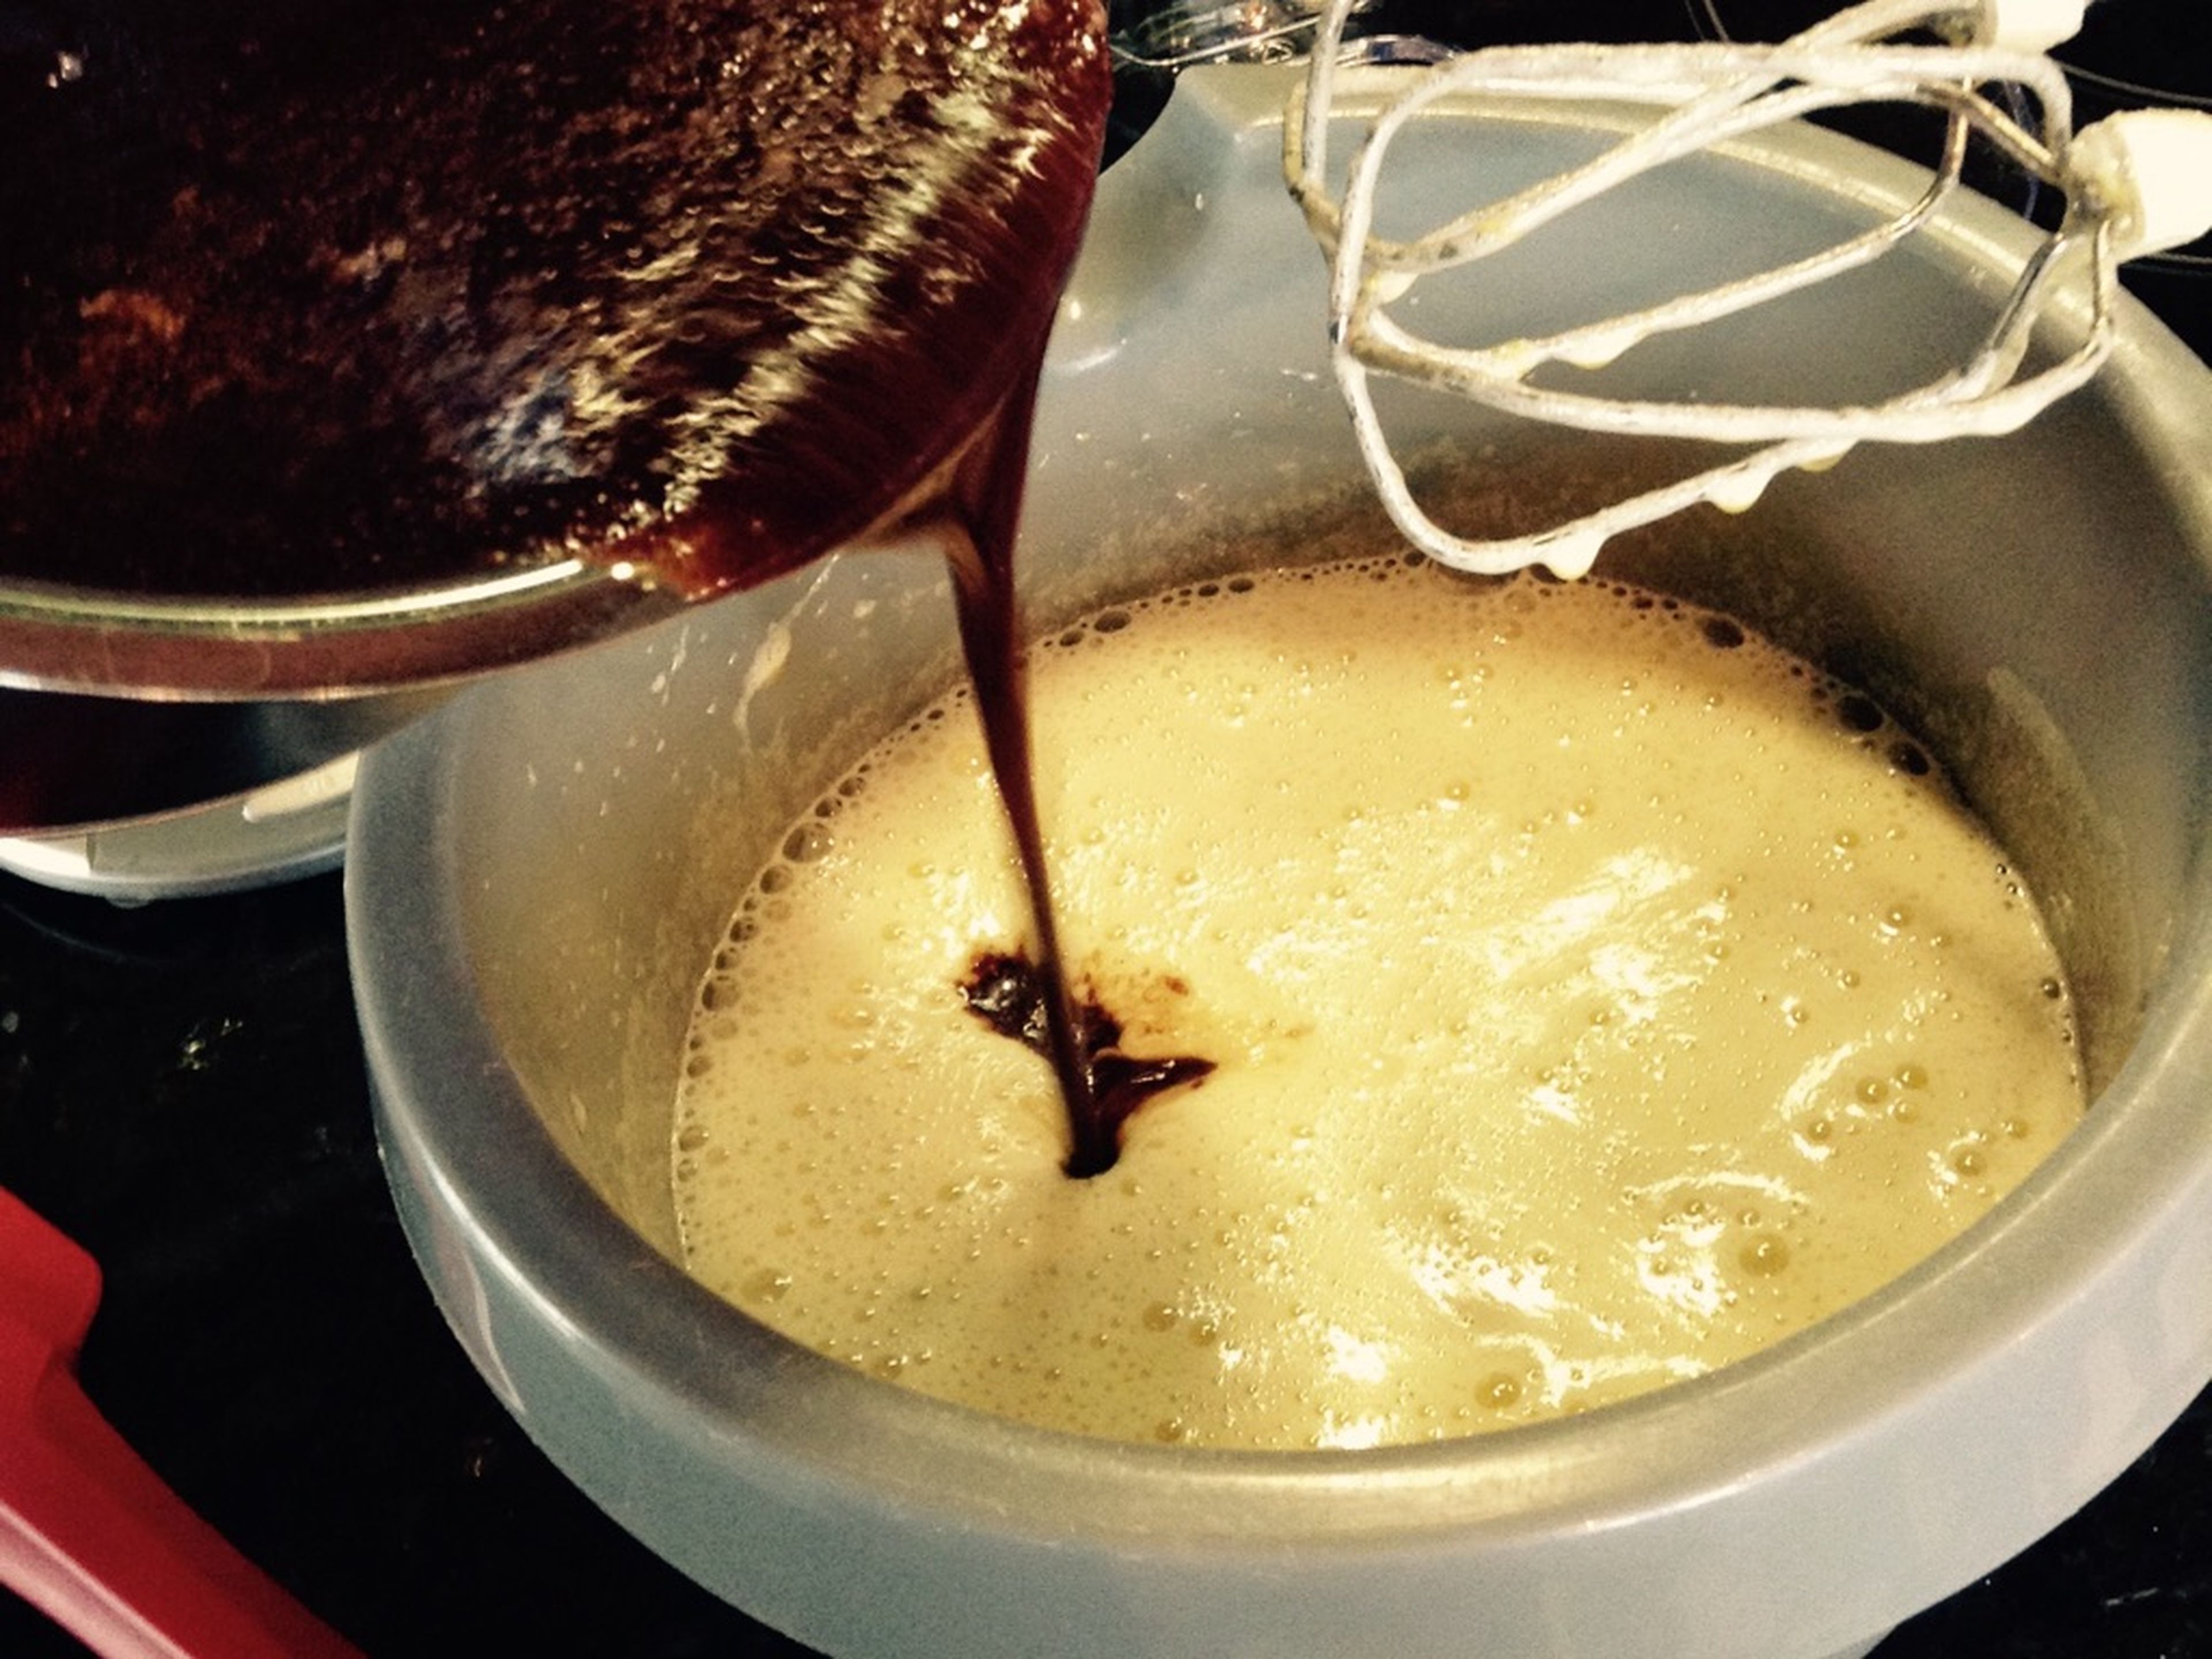 Now add the butter-chocolate mixture and whisk briefly.